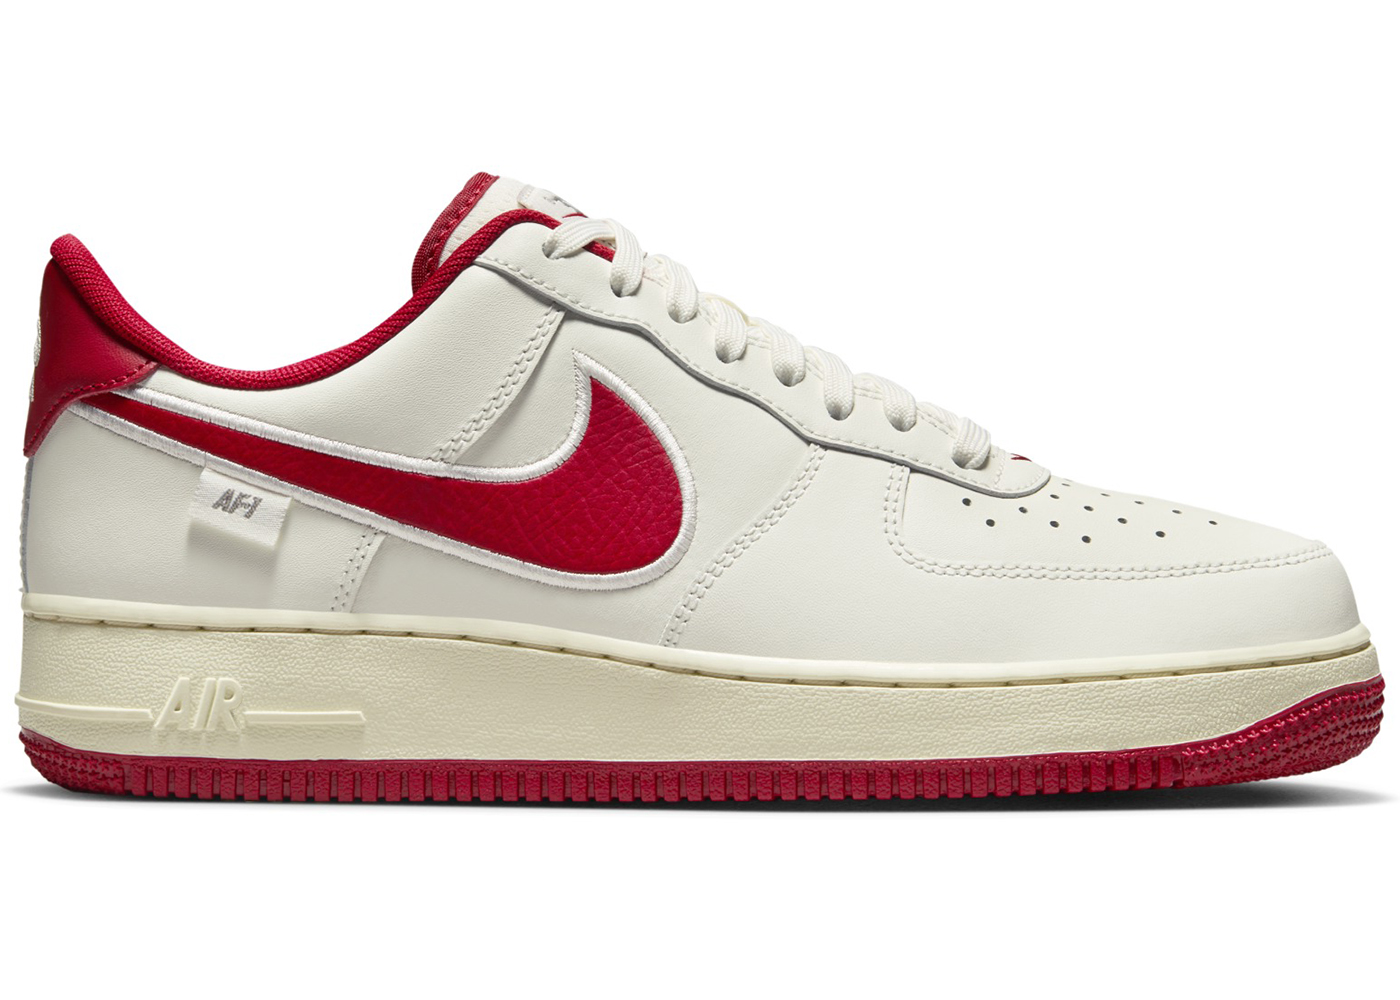 Nike Air Force 1 Low '07 Sail Gym Red